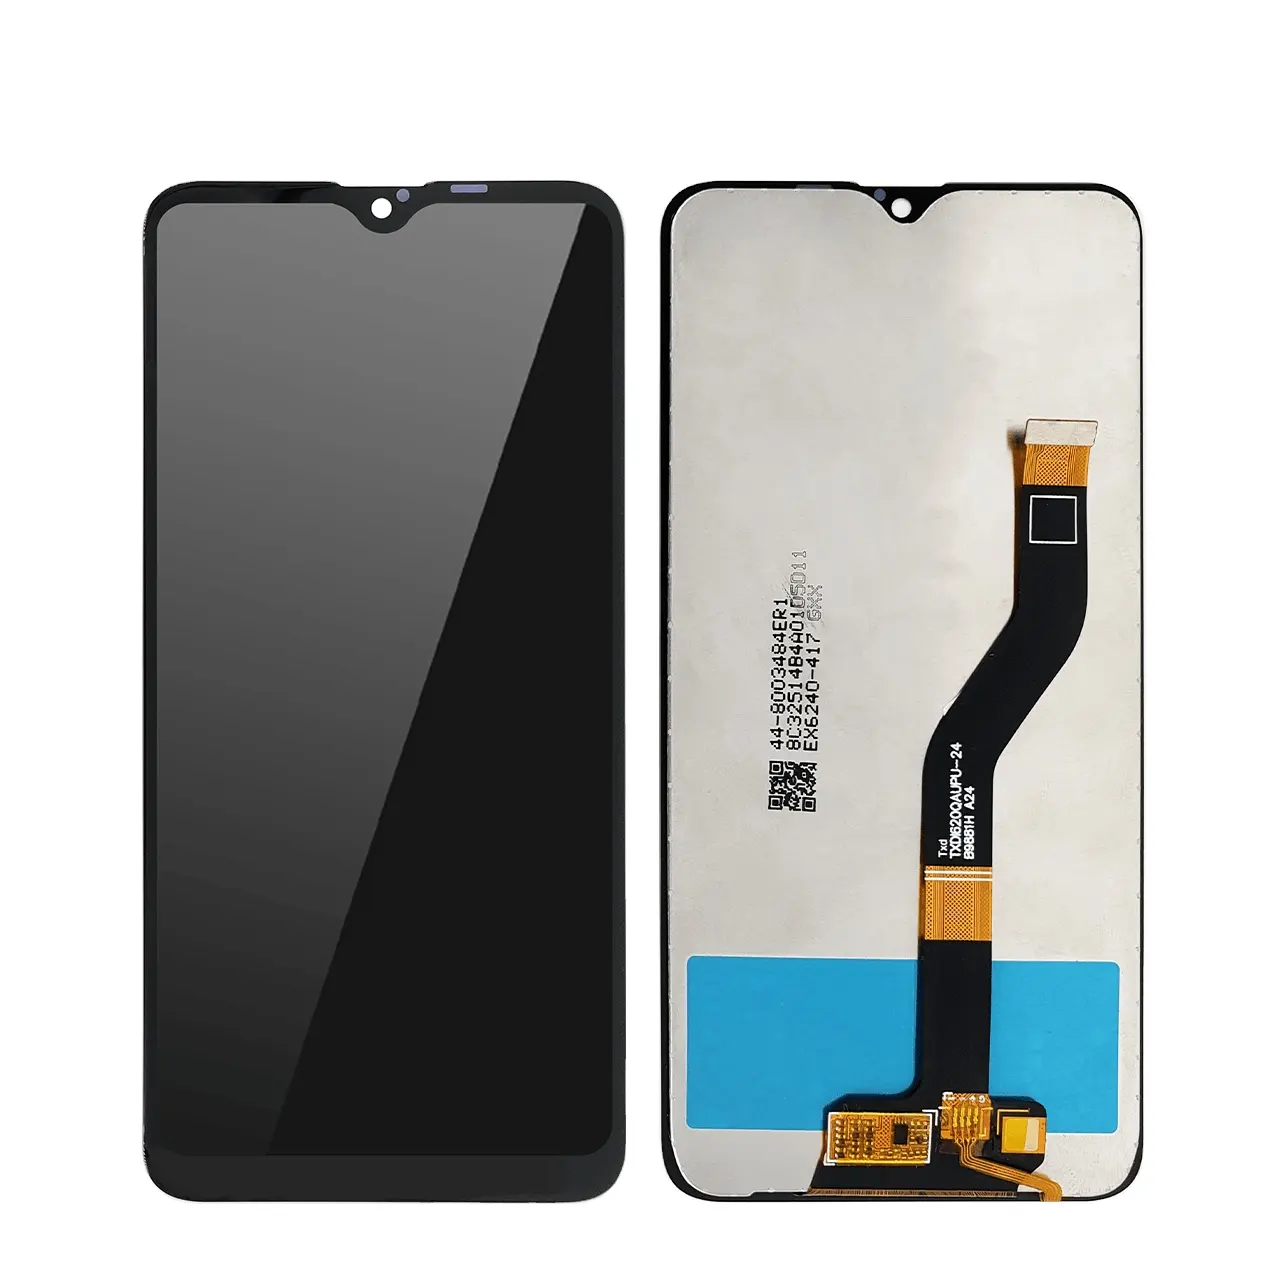 6.2" Original Display For Samsung Galaxy A10s A107 A107F SM-A107F LCD Display Screen replacement Digitizer Assembly